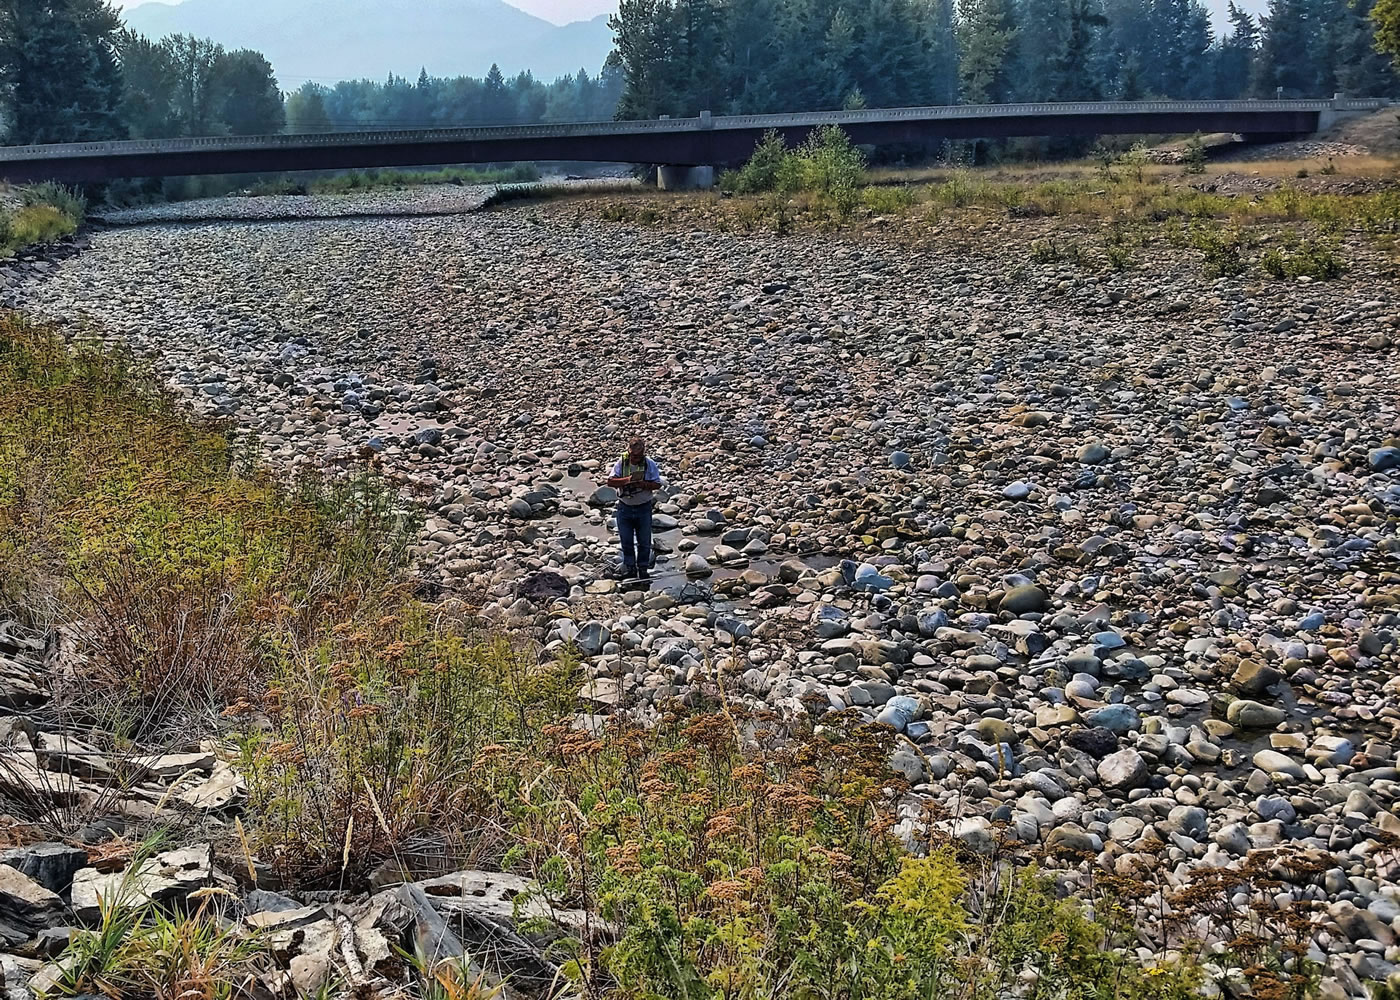 In this Aug 27, 2015 photo, a hydrologic technician from the U.S. Geological Survey Idaho Water Science Center measures streamflow in Lightning Creek at Clark Fork, Idaho. Federal scientists are conducting a drought study in six western states in an attempt to gain insights that could help resource managers better allocate scarce water supplies during future droughts. (Ryan Smith/U.S.